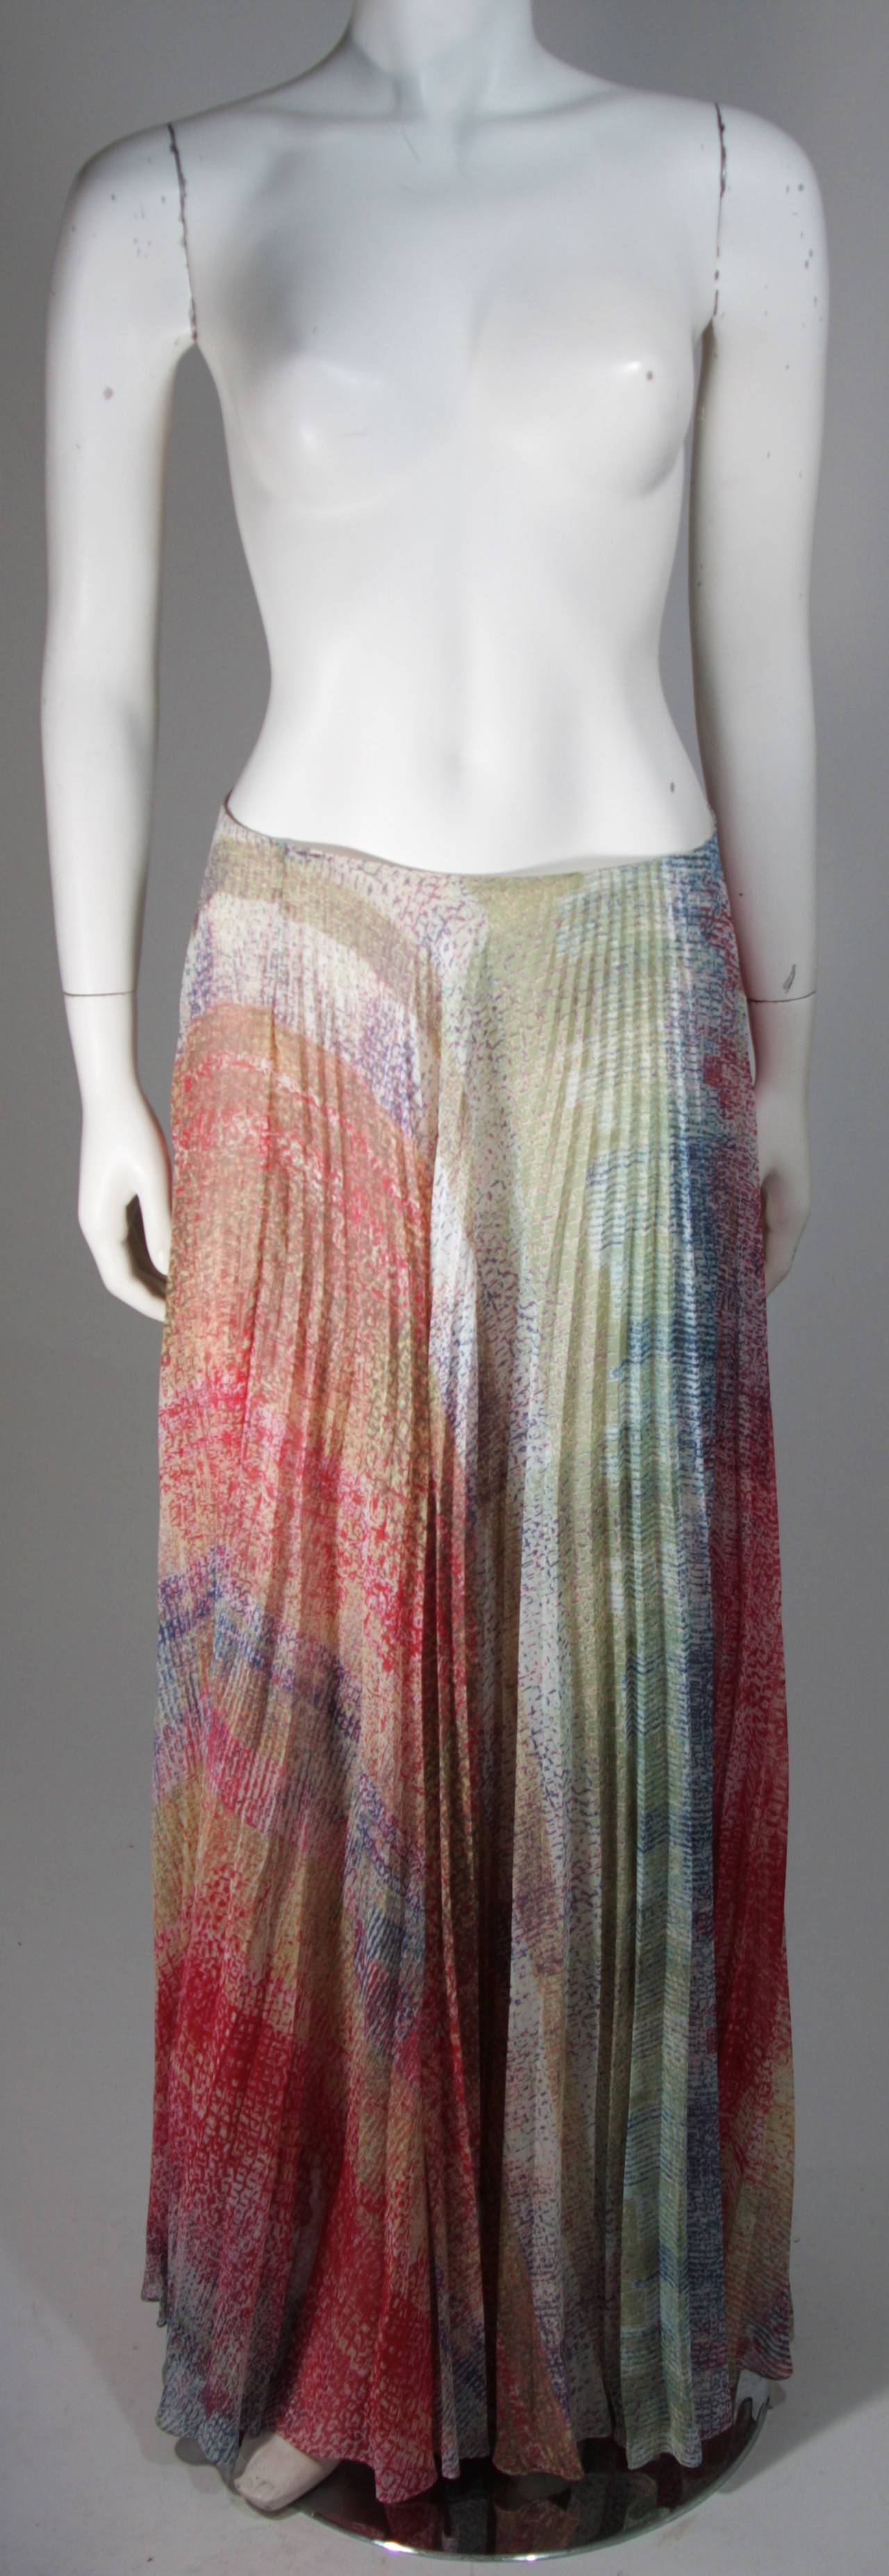 This Oscar De La Renta skirt is composed of a multi-color  printed chiffon. There is a zipper closure. In excellent condition. Made in U.S.A. 

**Please cross-reference measurements for personal accuracy. 

Measures (Approximately)
Length: